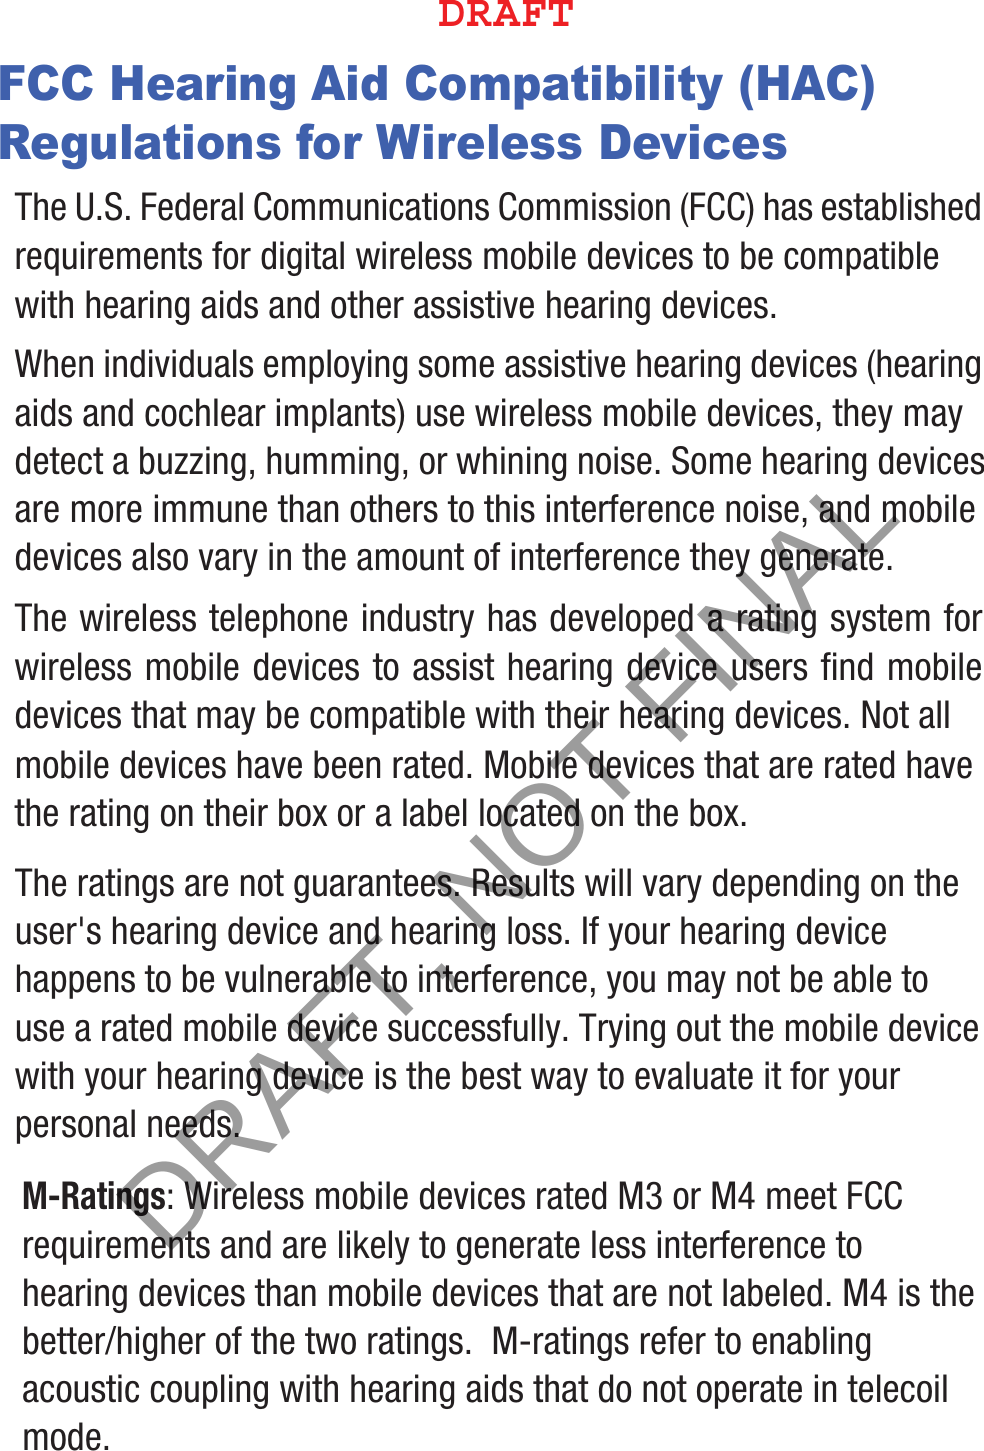 FCC Hearing Aid Compatibility (HAC) Regulations for Wireless DevicesThe U.S. Federal Communications Commission (FCC) has established requirements for digital wireless mobile devices to be compatible with hearing aids and other assistive hearing devices.When individuals employing some assistive hearing devices (hearing aids and cochlear implants) use wireless mobile devices, they may detect a buzzing, humming, or whining noise. Some hearing devices are more immune than others to this interference noise, and mobile devices also vary in the amount of interference they generate.The wireless telephone industry has developed a rating system for wireless mobile devices to assist hearing device users find mobile devices that may be compatible with their hearing devices. Not all mobile devices have been rated. Mobile devices that are rated have the rating on their box or a label located on the box.The ratings are not guarantees. Results will vary depending on the user&apos;s hearing device and hearing loss. If your hearing device happens to be vulnerable to interference, you may not be able to use a rated mobile device successfully. Trying out the mobile device with your hearing device is the best way to evaluate it for your personal needs.M-Ratings: Wireless mobile devices rated M3 or M4 meet FCC requirements and are likely to generate less interference to hearing devices than mobile devices that are not labeled. M4 is the better/higher of the two ratings.  M-ratings refer to enabling acoustic coupling with hearing aids that do not operate in telecoil mode.%3&quot;&apos;5DRAFT, NOT FINAL